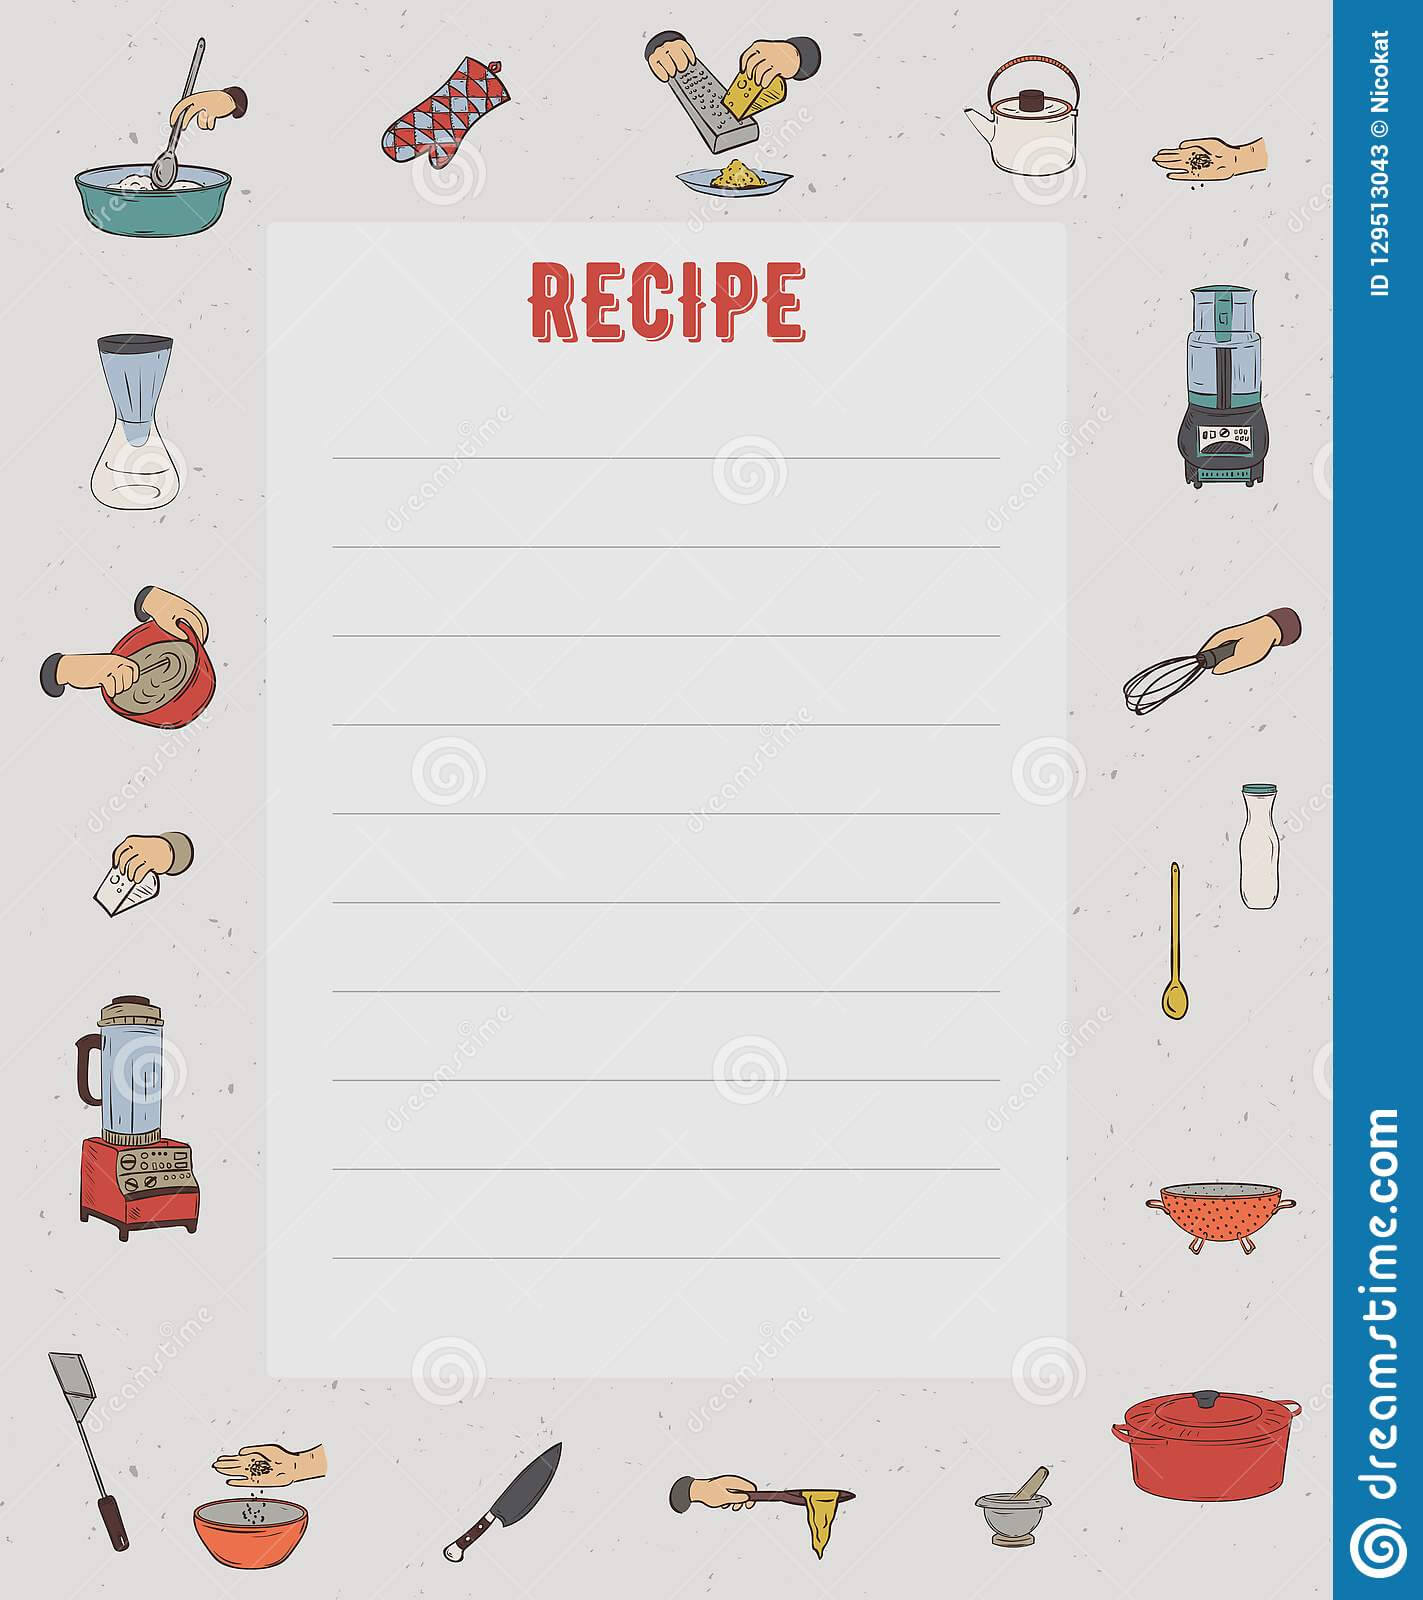 Recipe Card. Cookbook Page. Design Template With Kitchen Intended For Restaurant Recipe Card Template